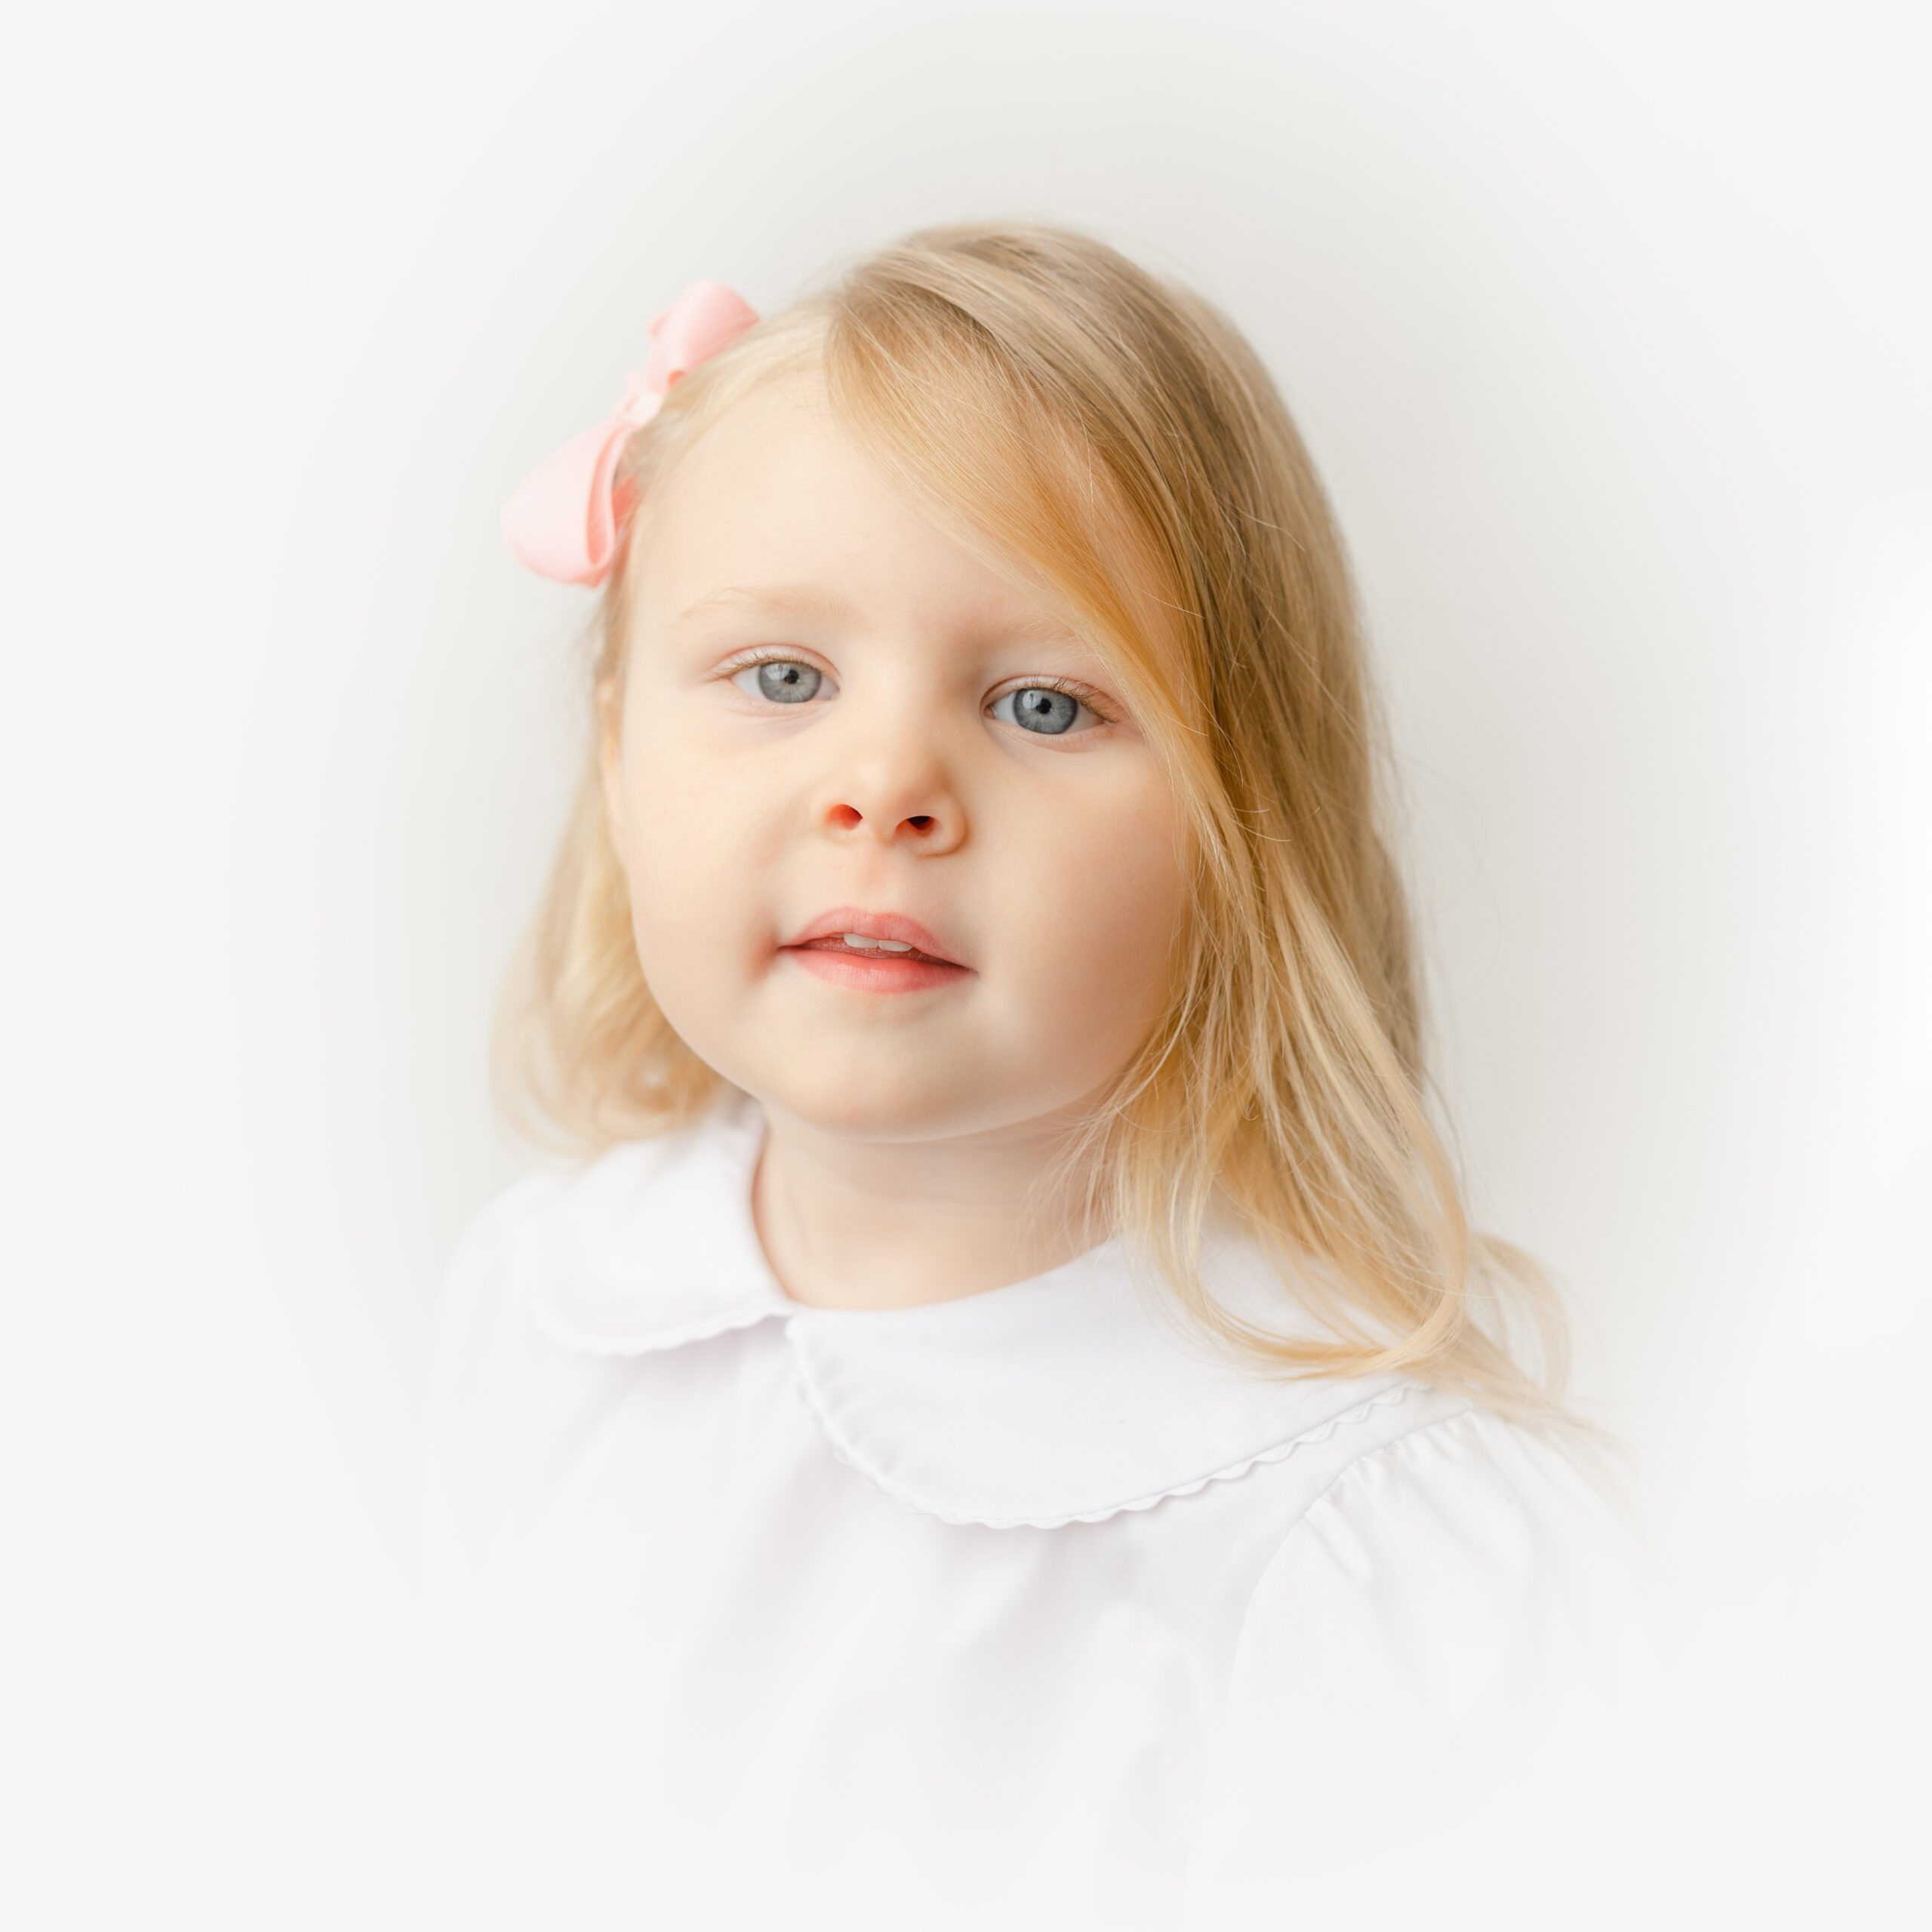 Lily wears a pink bow during her Heirloom Portrait.